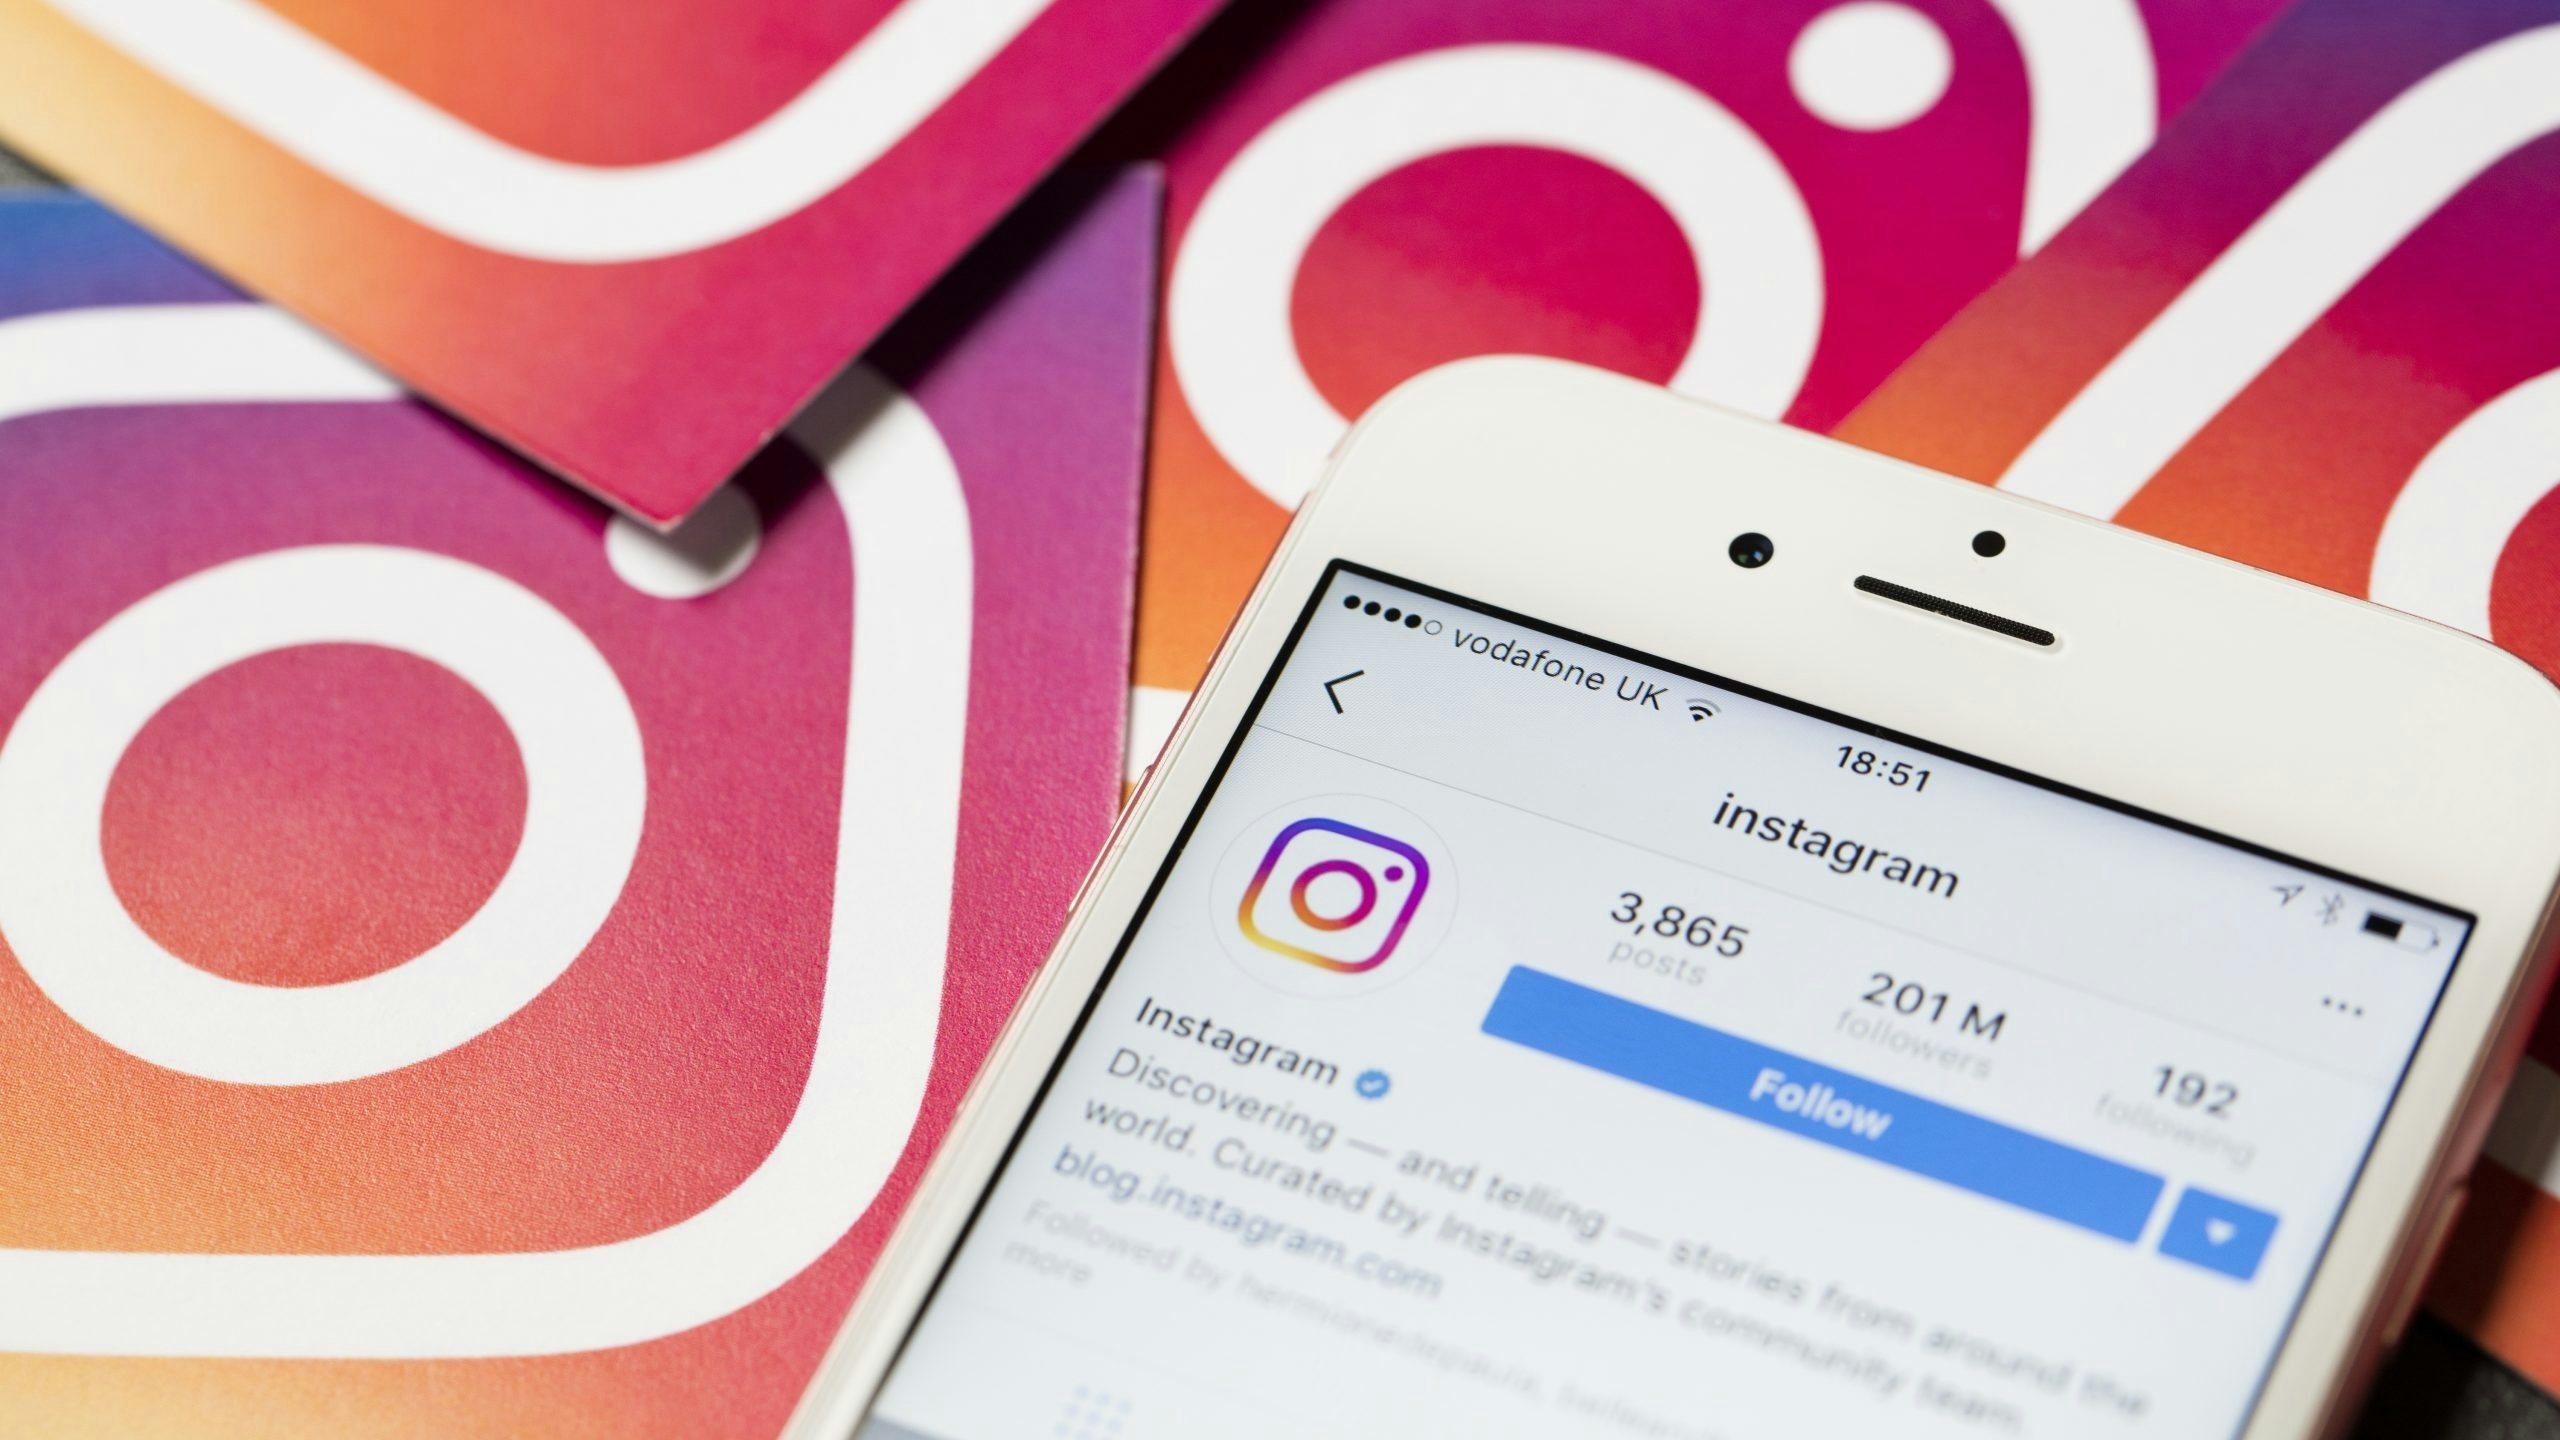 Instagram and Weibo are staples apps of globally-minded Chinese millennials. Which platform should luxury brands choose to reach this lucrative fanbase? Photo: Shutterstock.